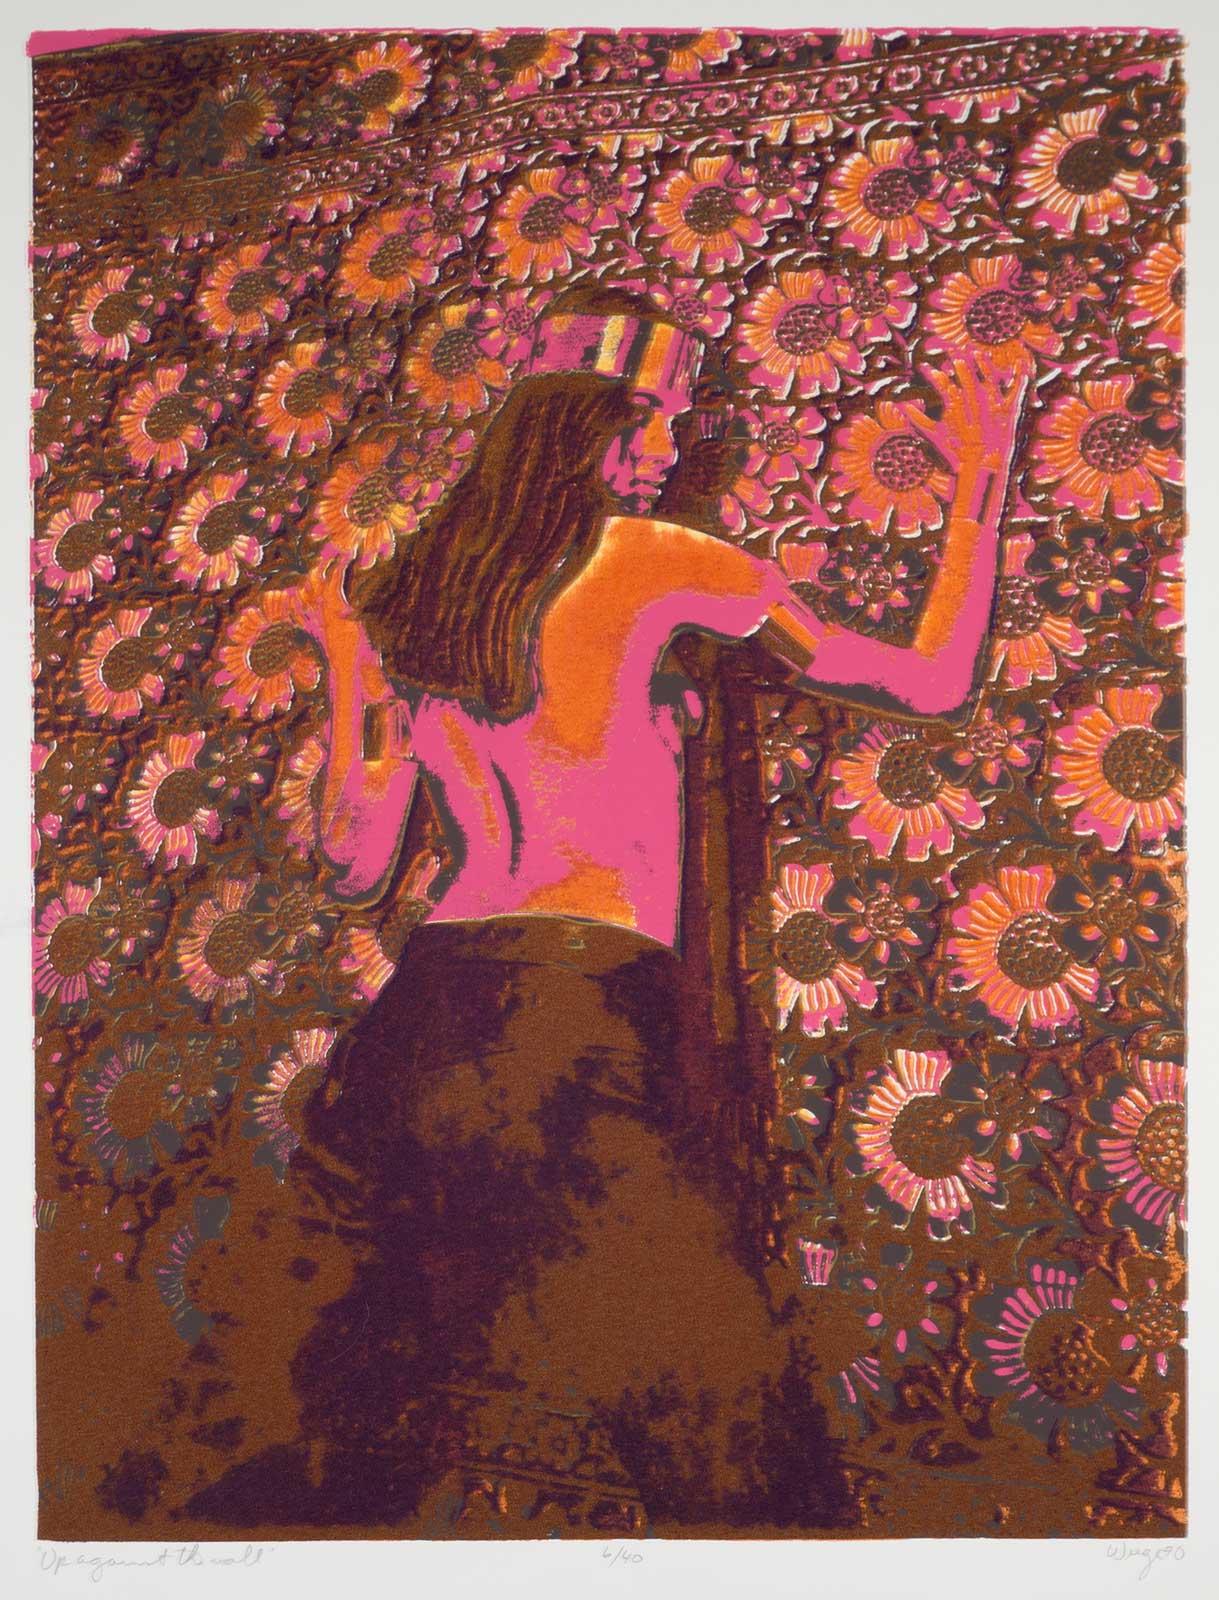 Up Against The Wall (A '70s image focused on anti-war and sexual mores) - Contemporary Print by William Weege